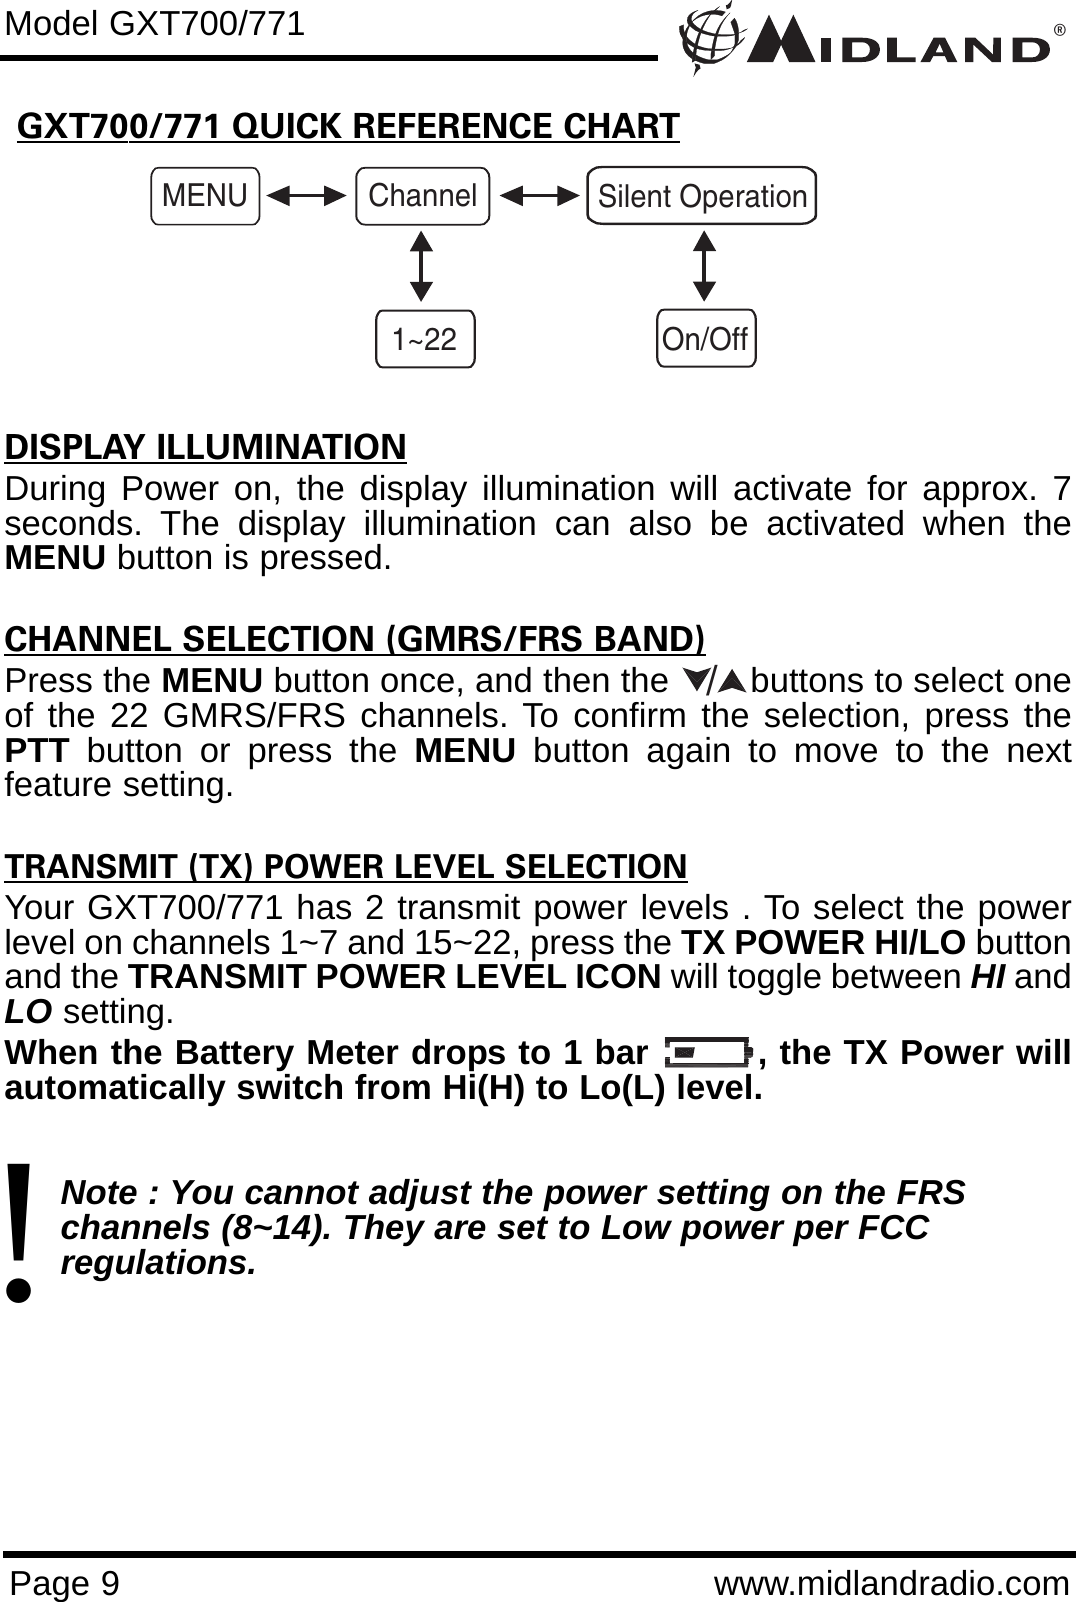 ®Page 9 www.midlandradio.comGXT700/771 QUICK REFERENCE CHARTModel GXT700/771MENU Channel1~22Silent OperationOn/OffDISPLAY ILLUMINATIONDuring Power on, the display illumination will activate for approx. 7seconds. The display illumination can also be activated when theMENU button is pressed.CHANNEL SELECTION (GMRS/FRS BAND)Press the MENU button once, and then the        buttons to select oneof the 22 GMRS/FRS channels. To confirm the selection, press thePTT button or press the MENU button again to move to the nextfeature setting.TRANSMIT (TX) POWER LEVEL SELECTIONYour GXT700/771 has 2 transmit power levels . To select the powerlevel on channels 1~7 and 15~22, press the TX POWER HI/LO buttonand the TRANSMIT POWER LEVEL ICON will toggle between HI andLO setting.When the Battery Meter drops to 1 bar         , the TX Power willautomatically switch from Hi(H) to Lo(L) level.Note : You cannot adjust the power setting on the FRS   channels (8~14). They are set to Low power per FCC          regulations./!